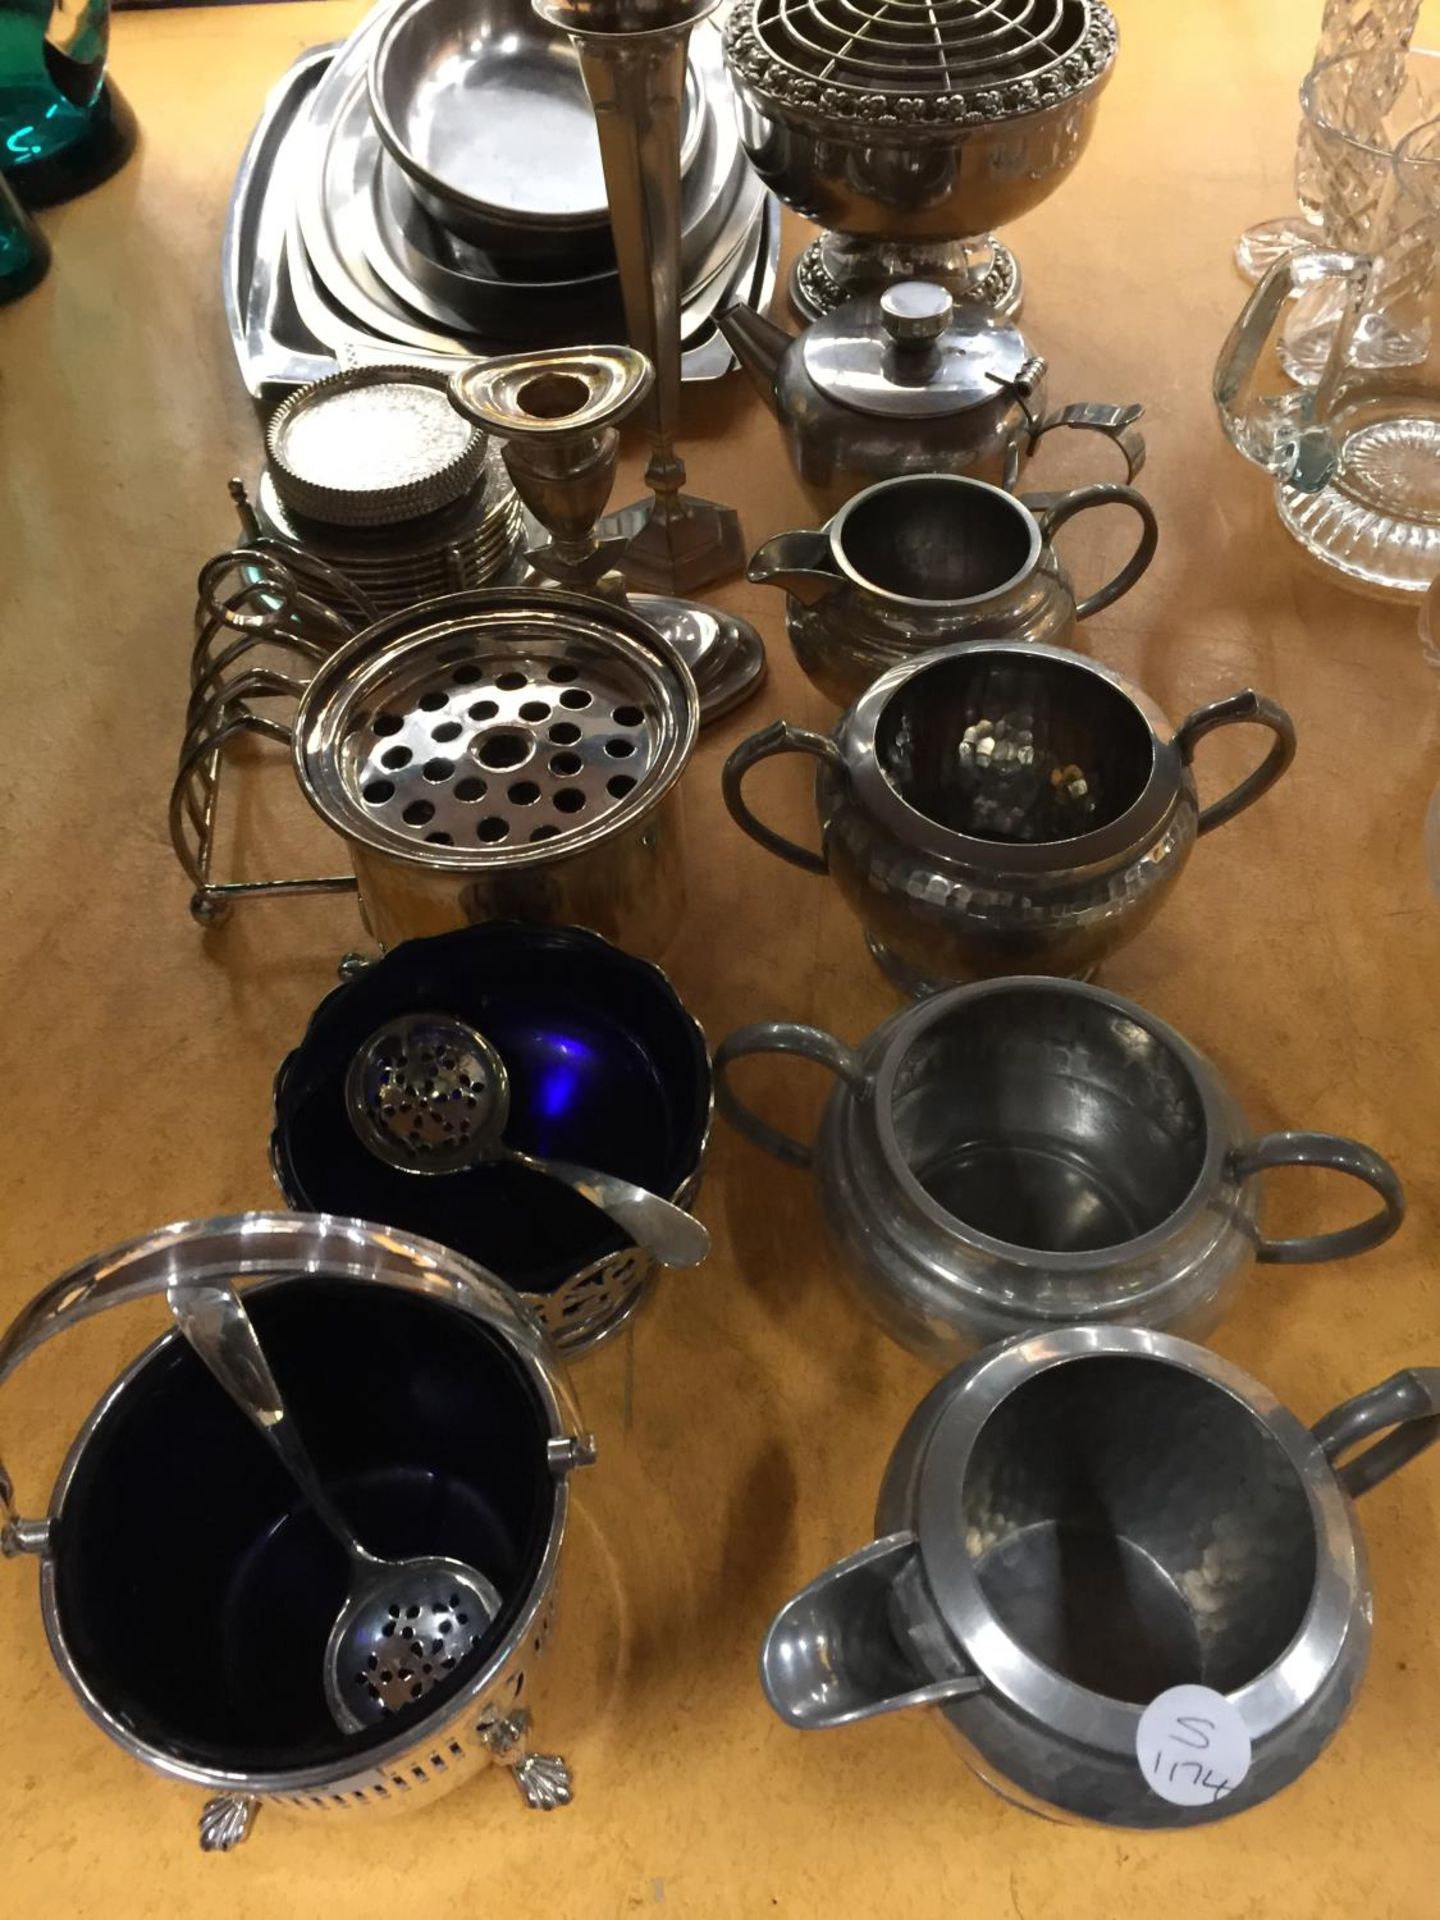 A QUANTITY OF SILVER PLATED ITEMS TO INCLUDE SERVING BOWLS WITH BLUE GLASS LINERS, A CANDLESTICK, - Image 6 of 8